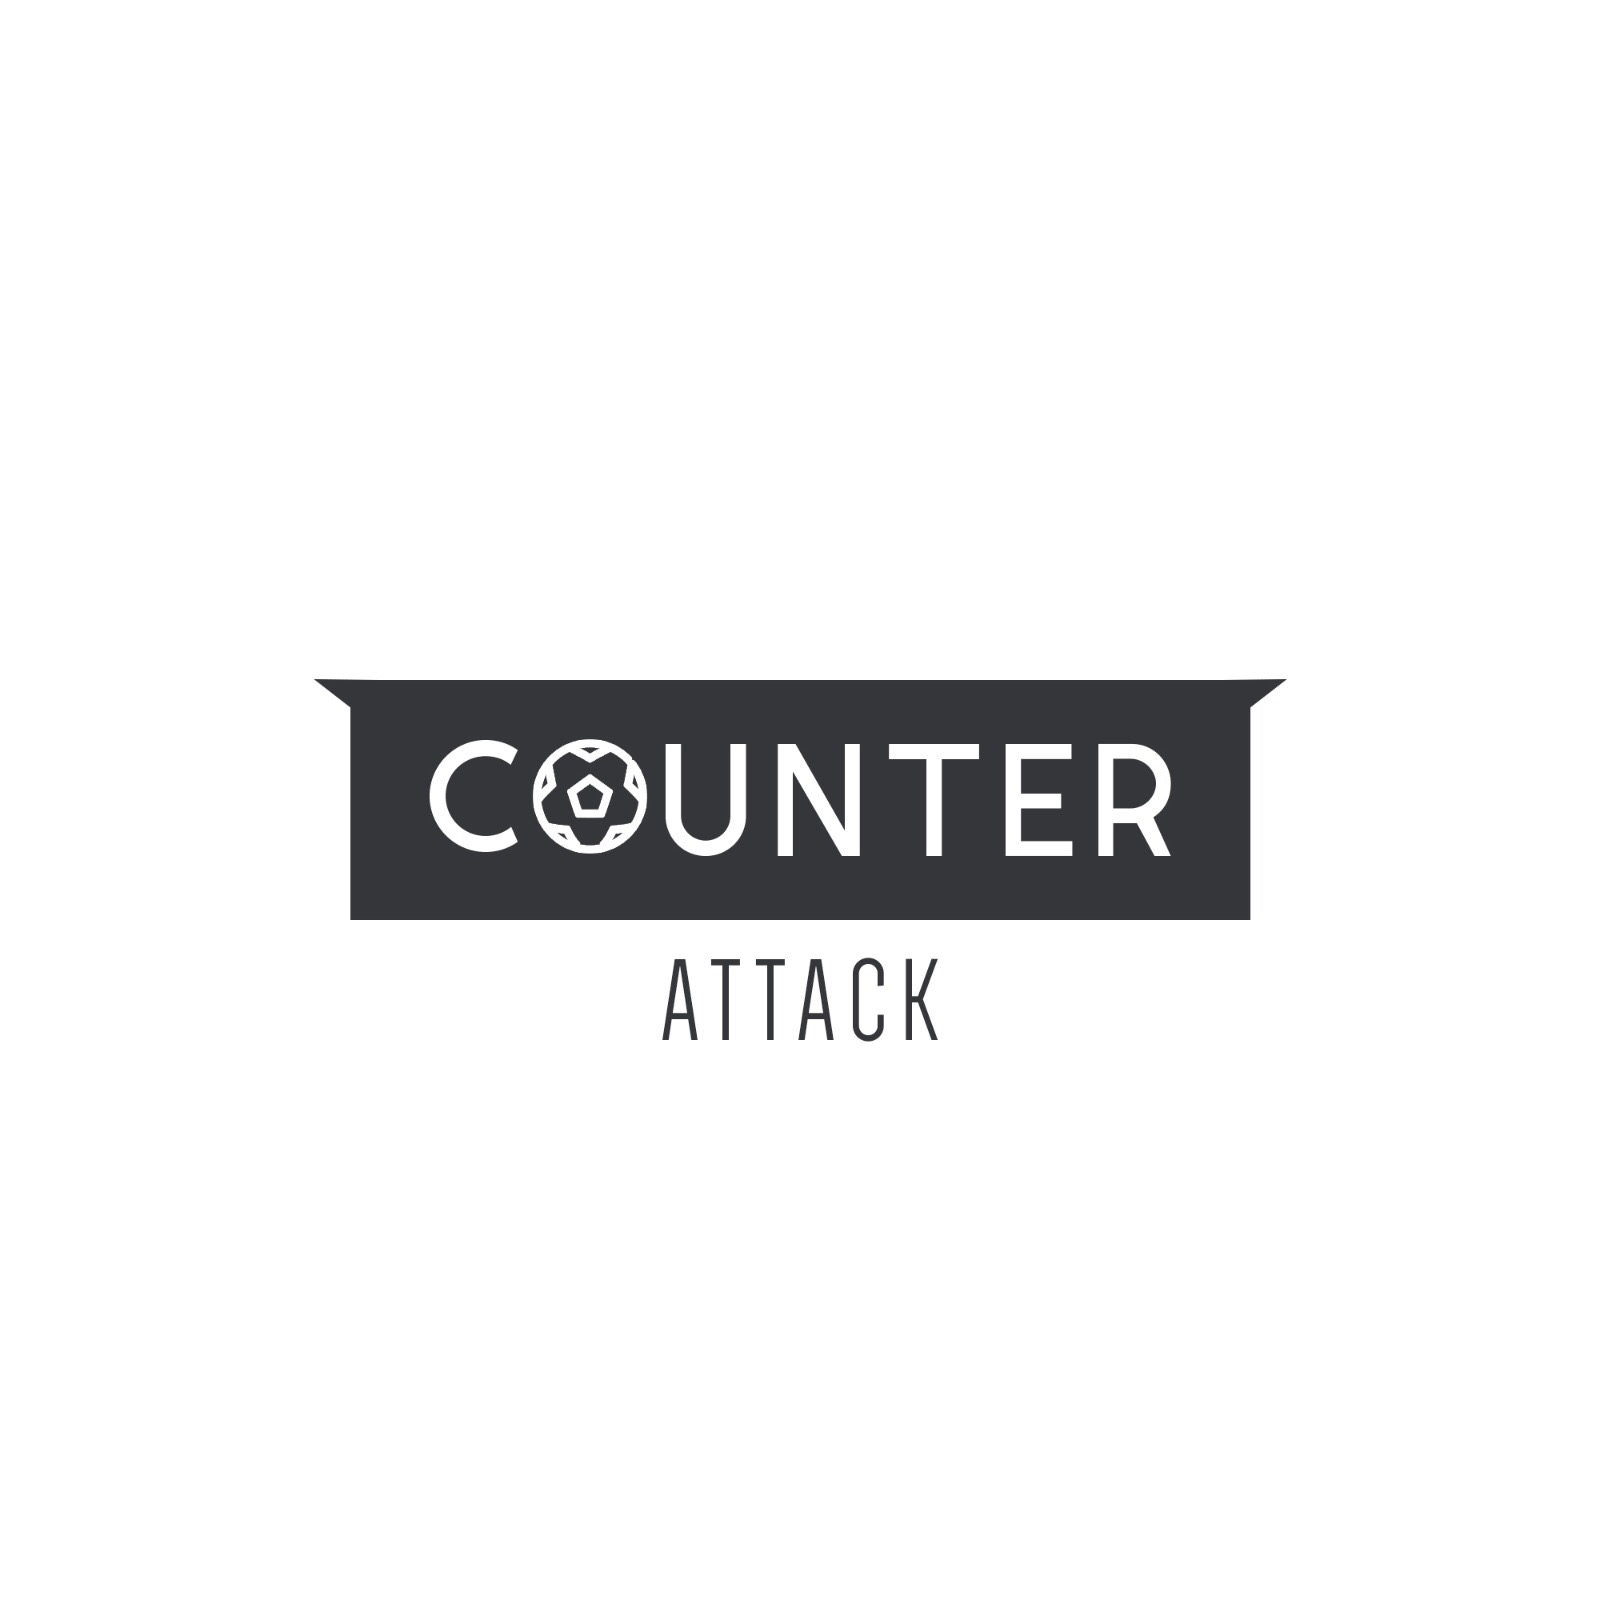 Counter Attack - Episode 168 - Phase Two Up And Running For Faal